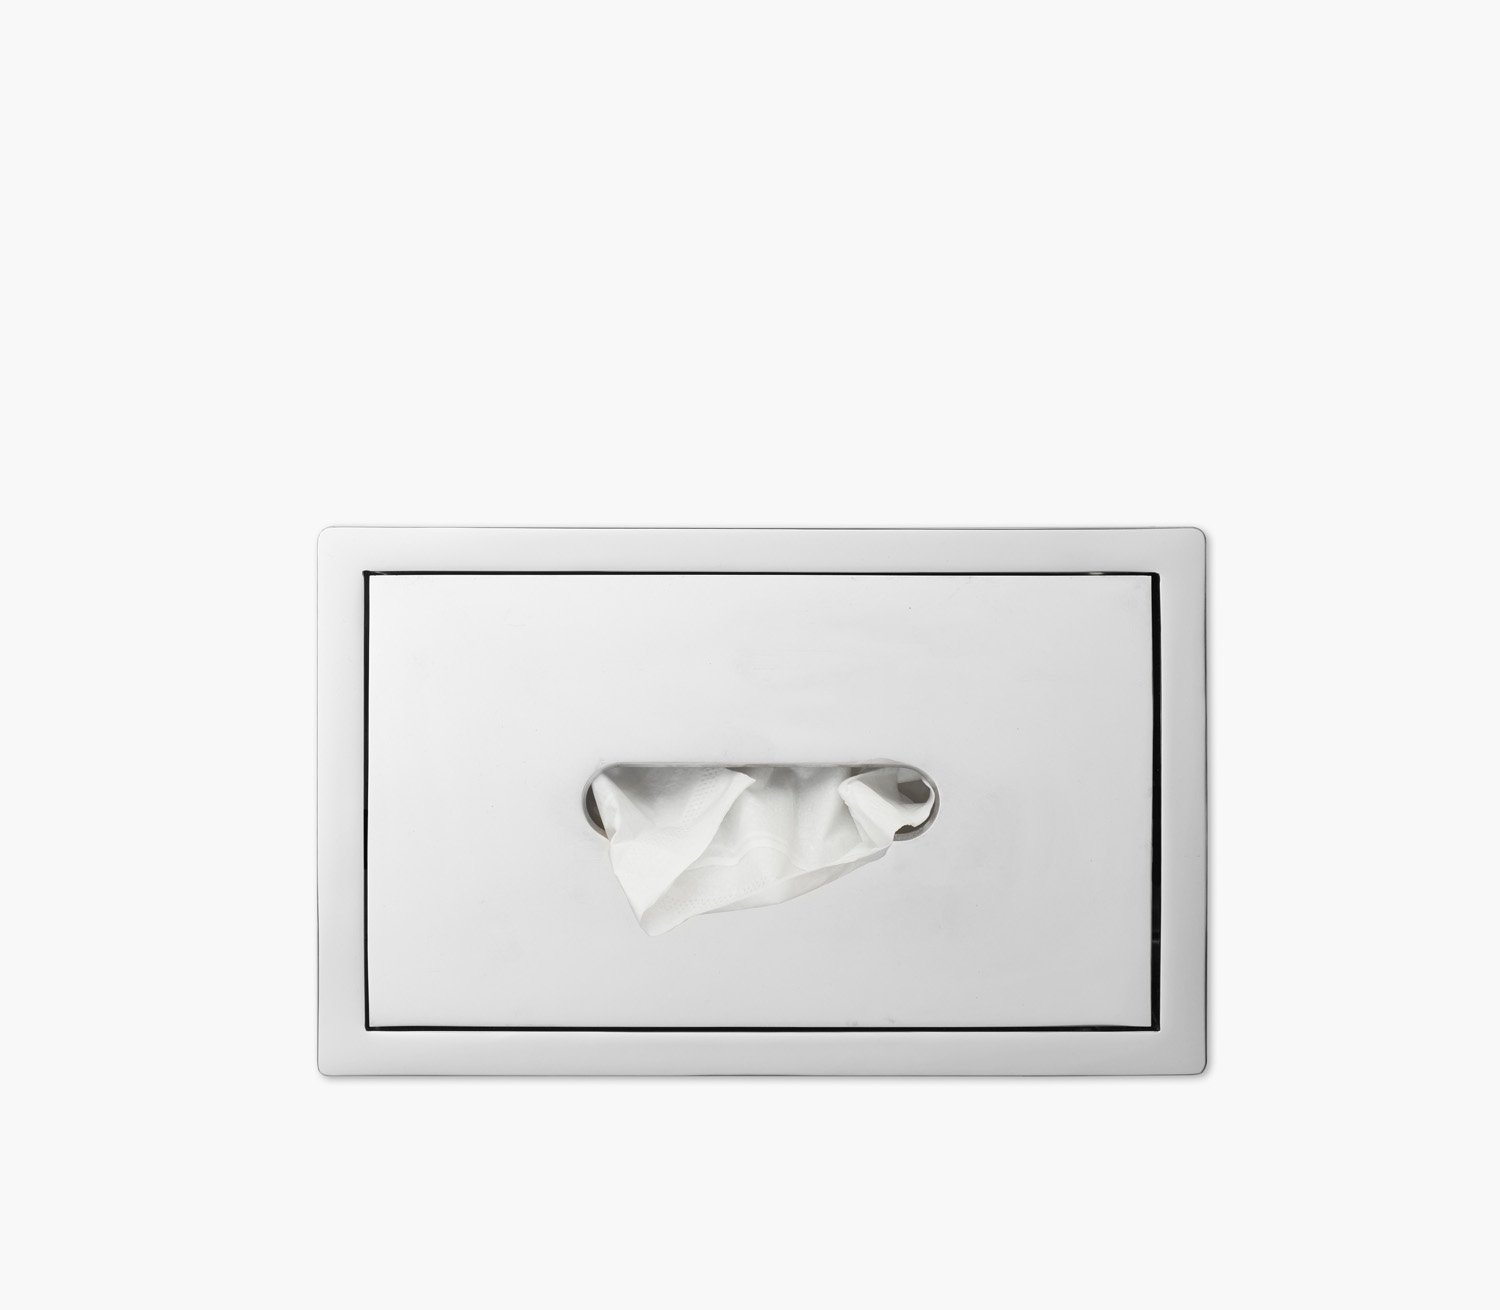 Wall Recessed Tissue Holder Product Image 4